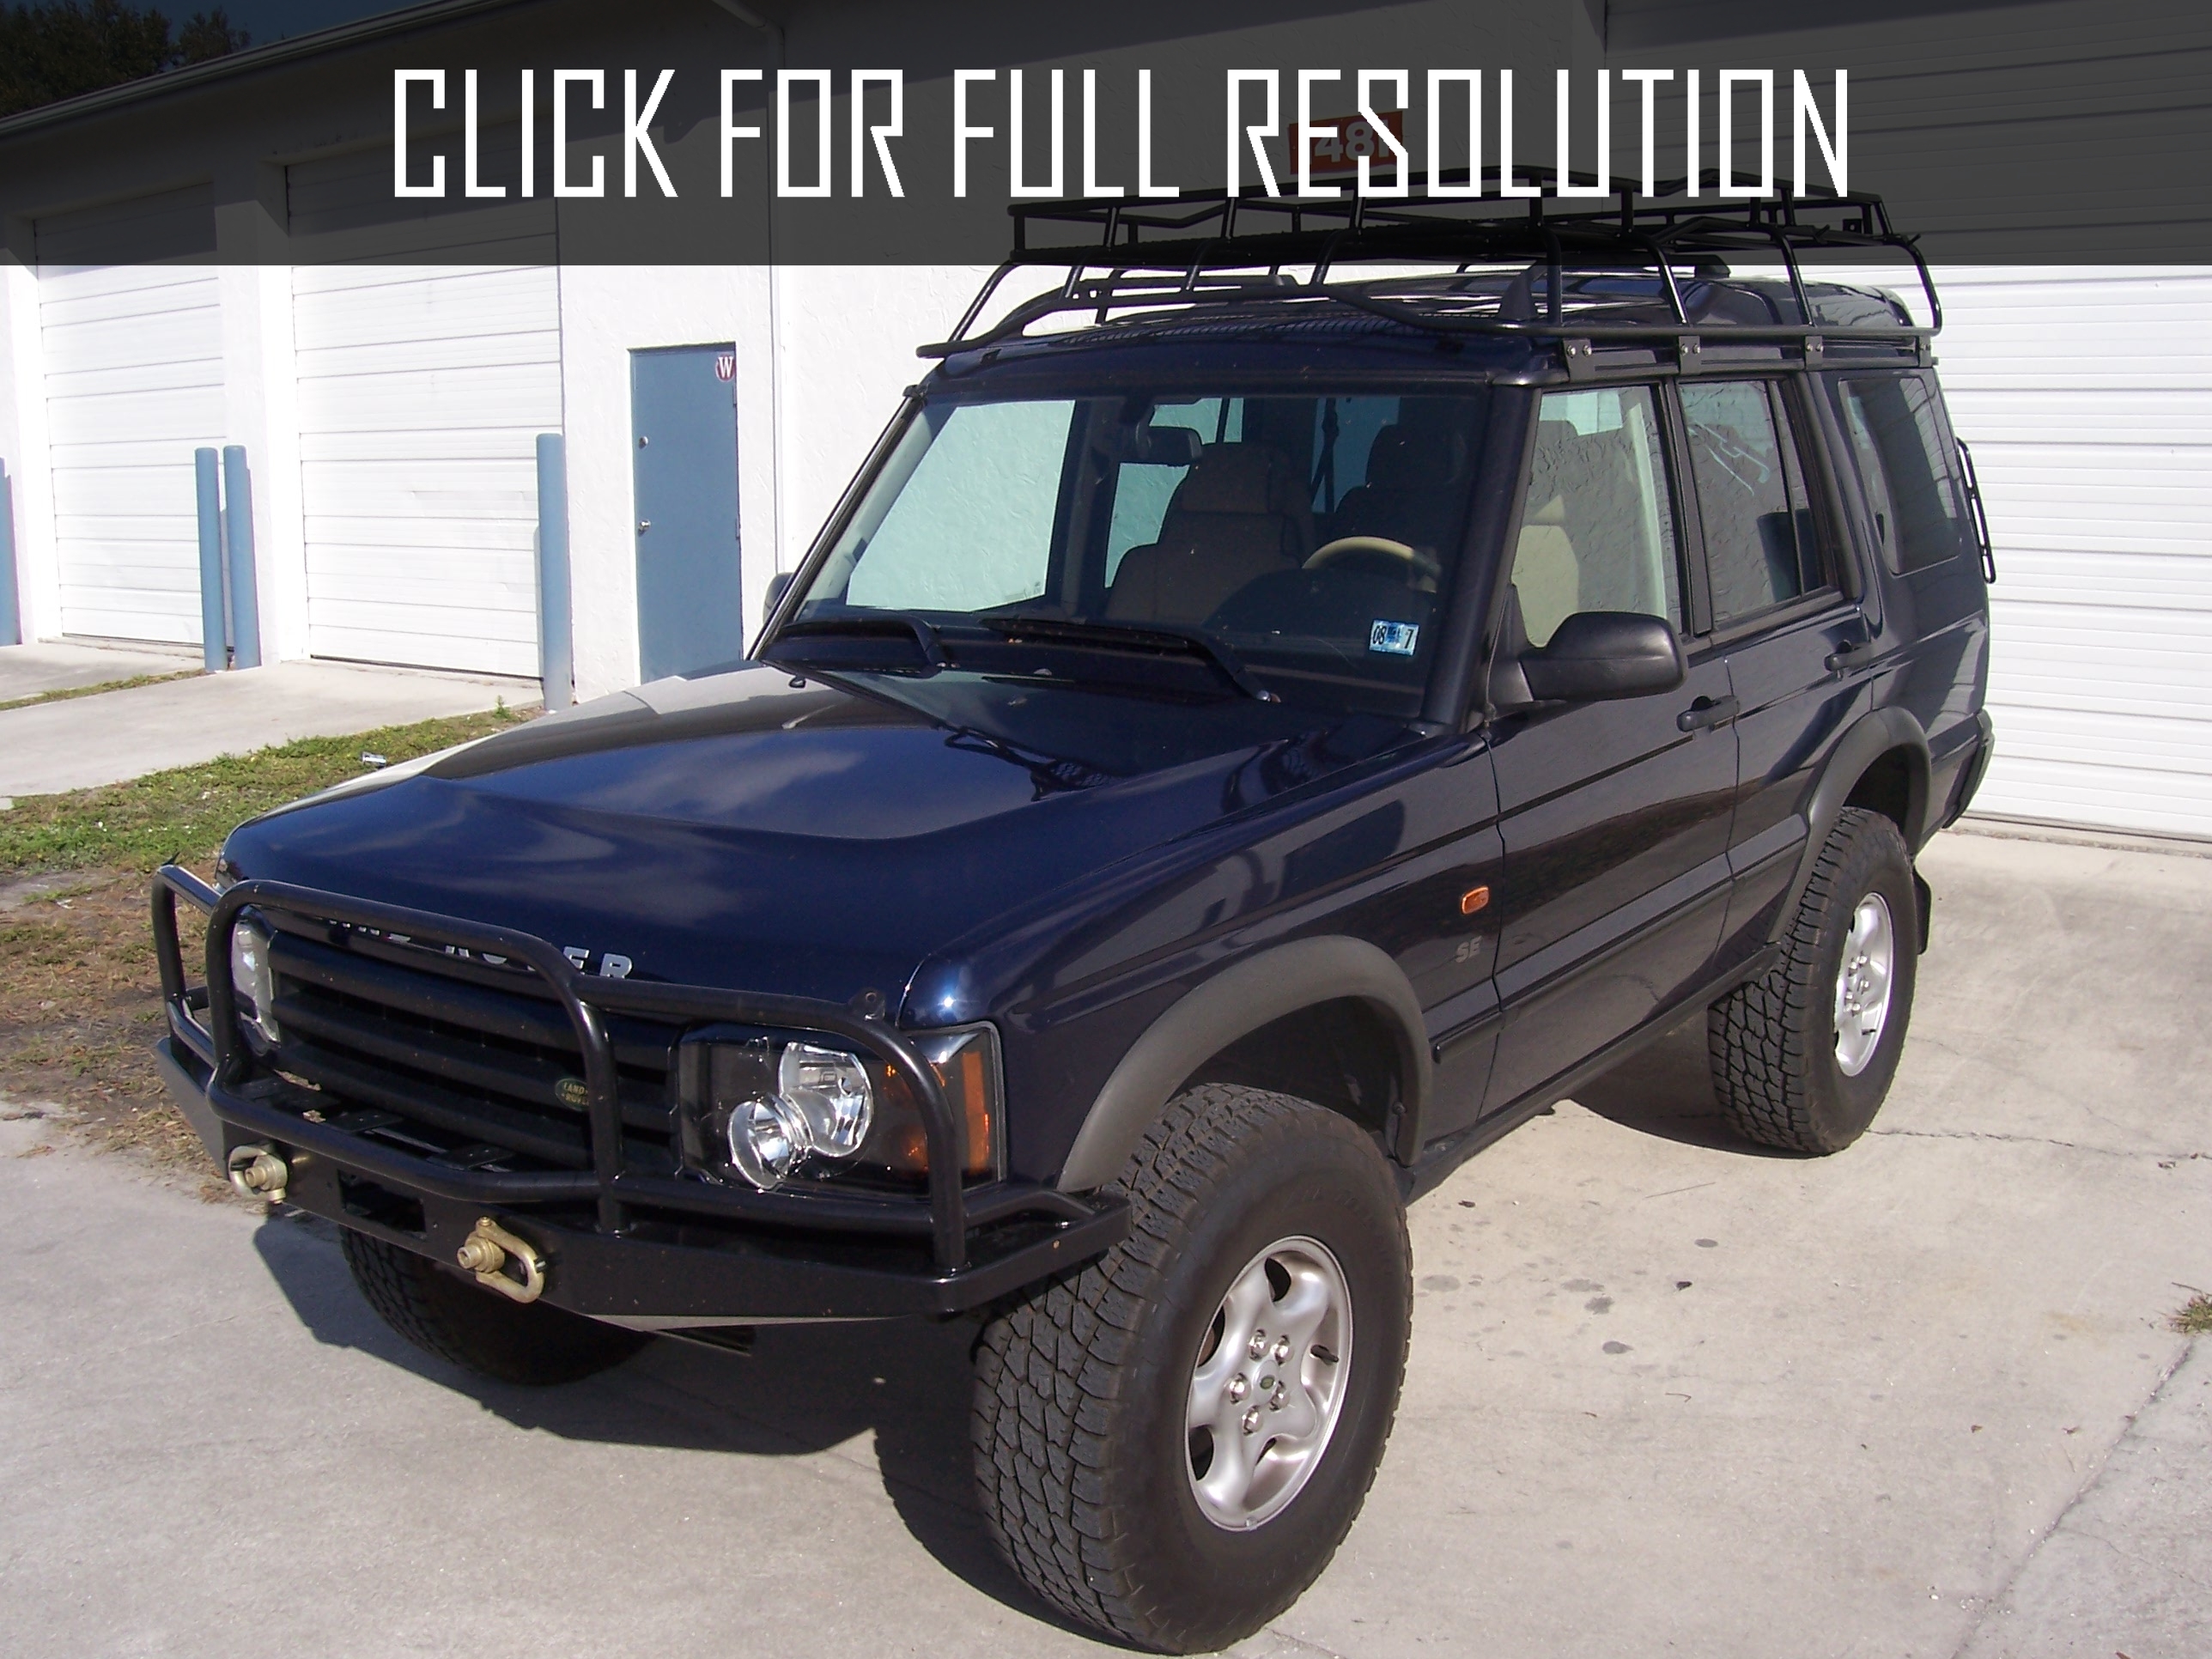 2000 Land Rover Discovery 2